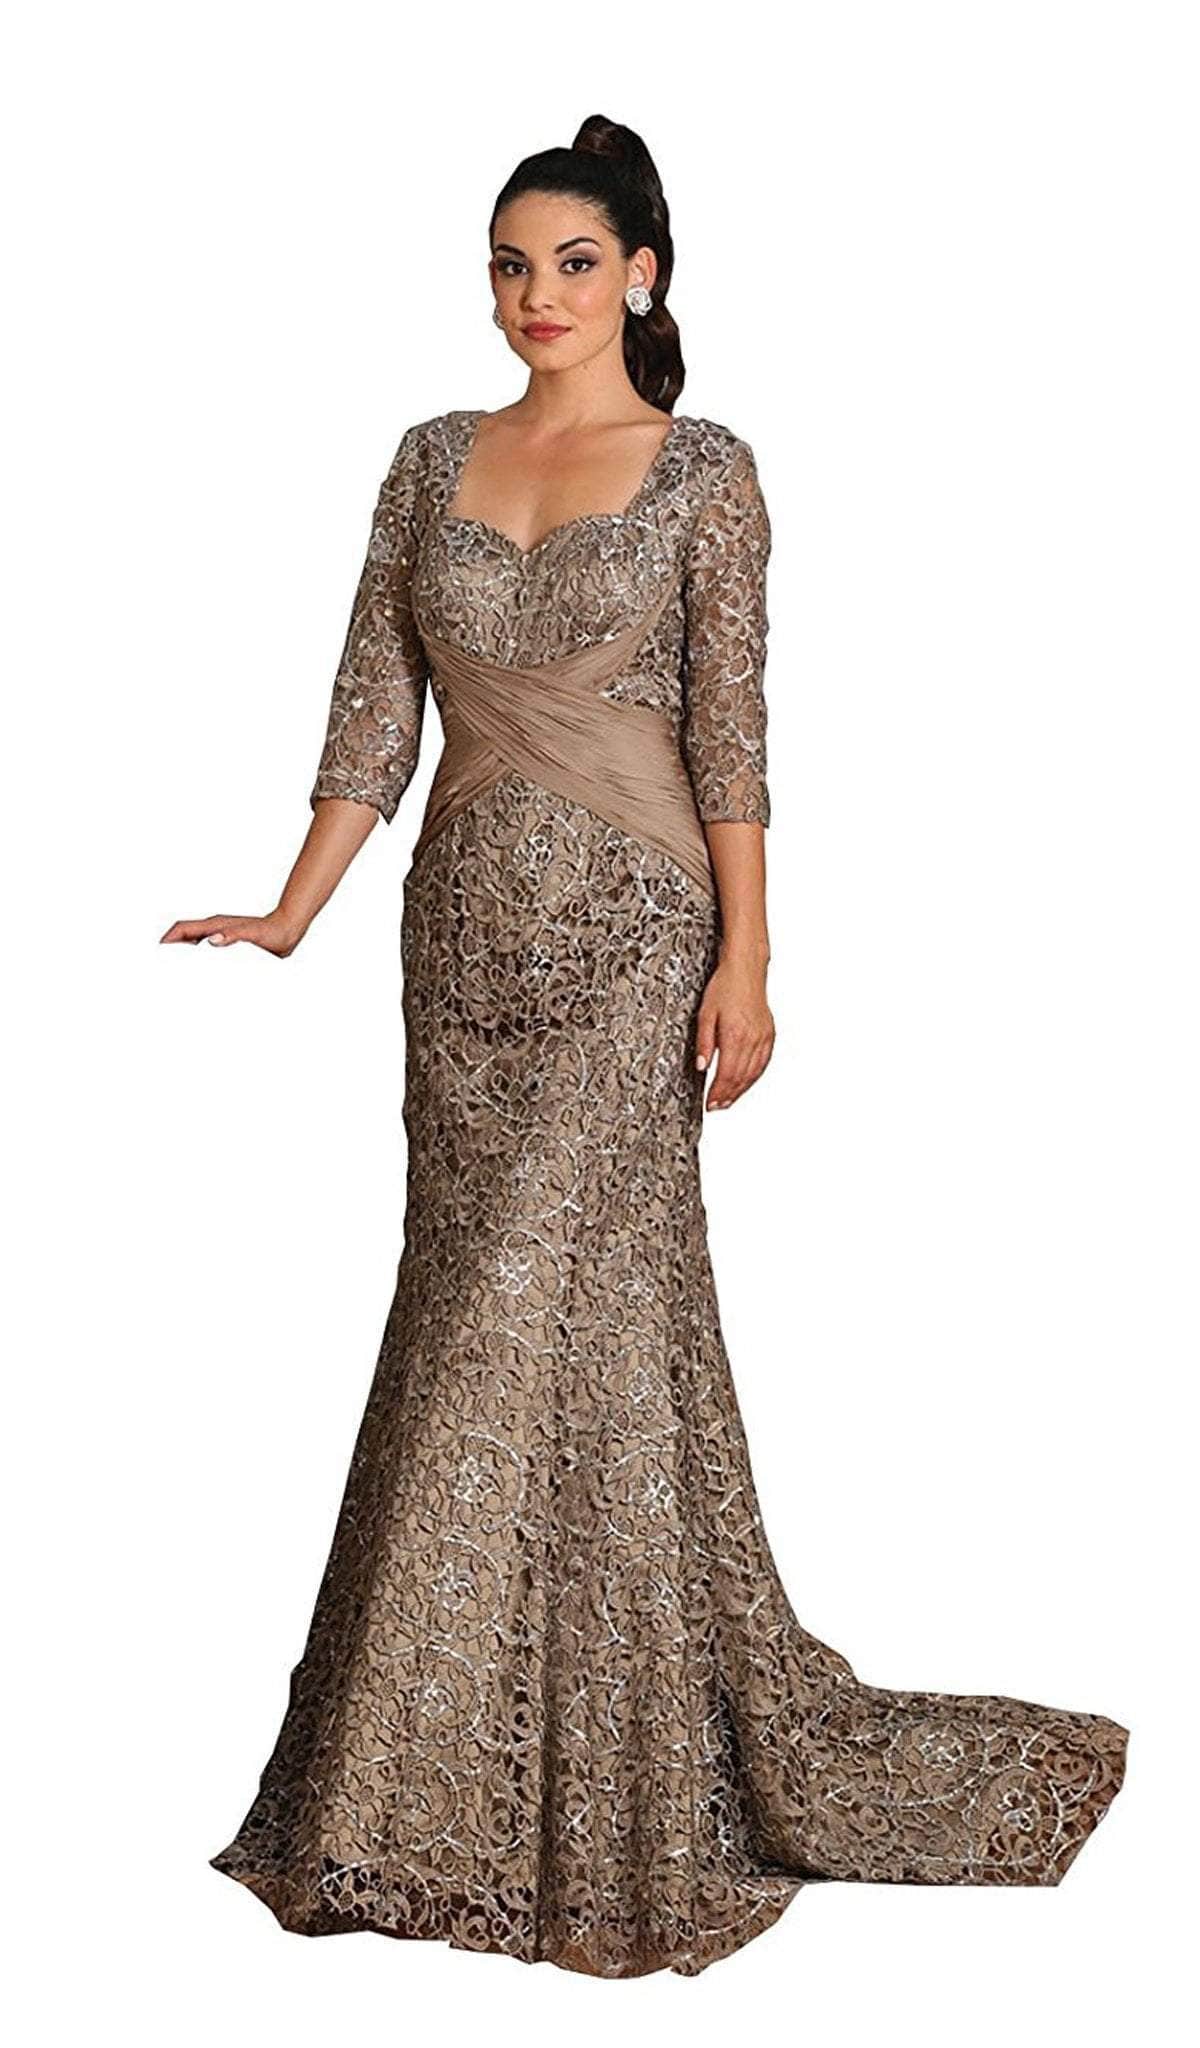 May Queen - Lace Crisscrossed Shirring Mermaid Evening Gown Evening Dresses M / Cappuccino